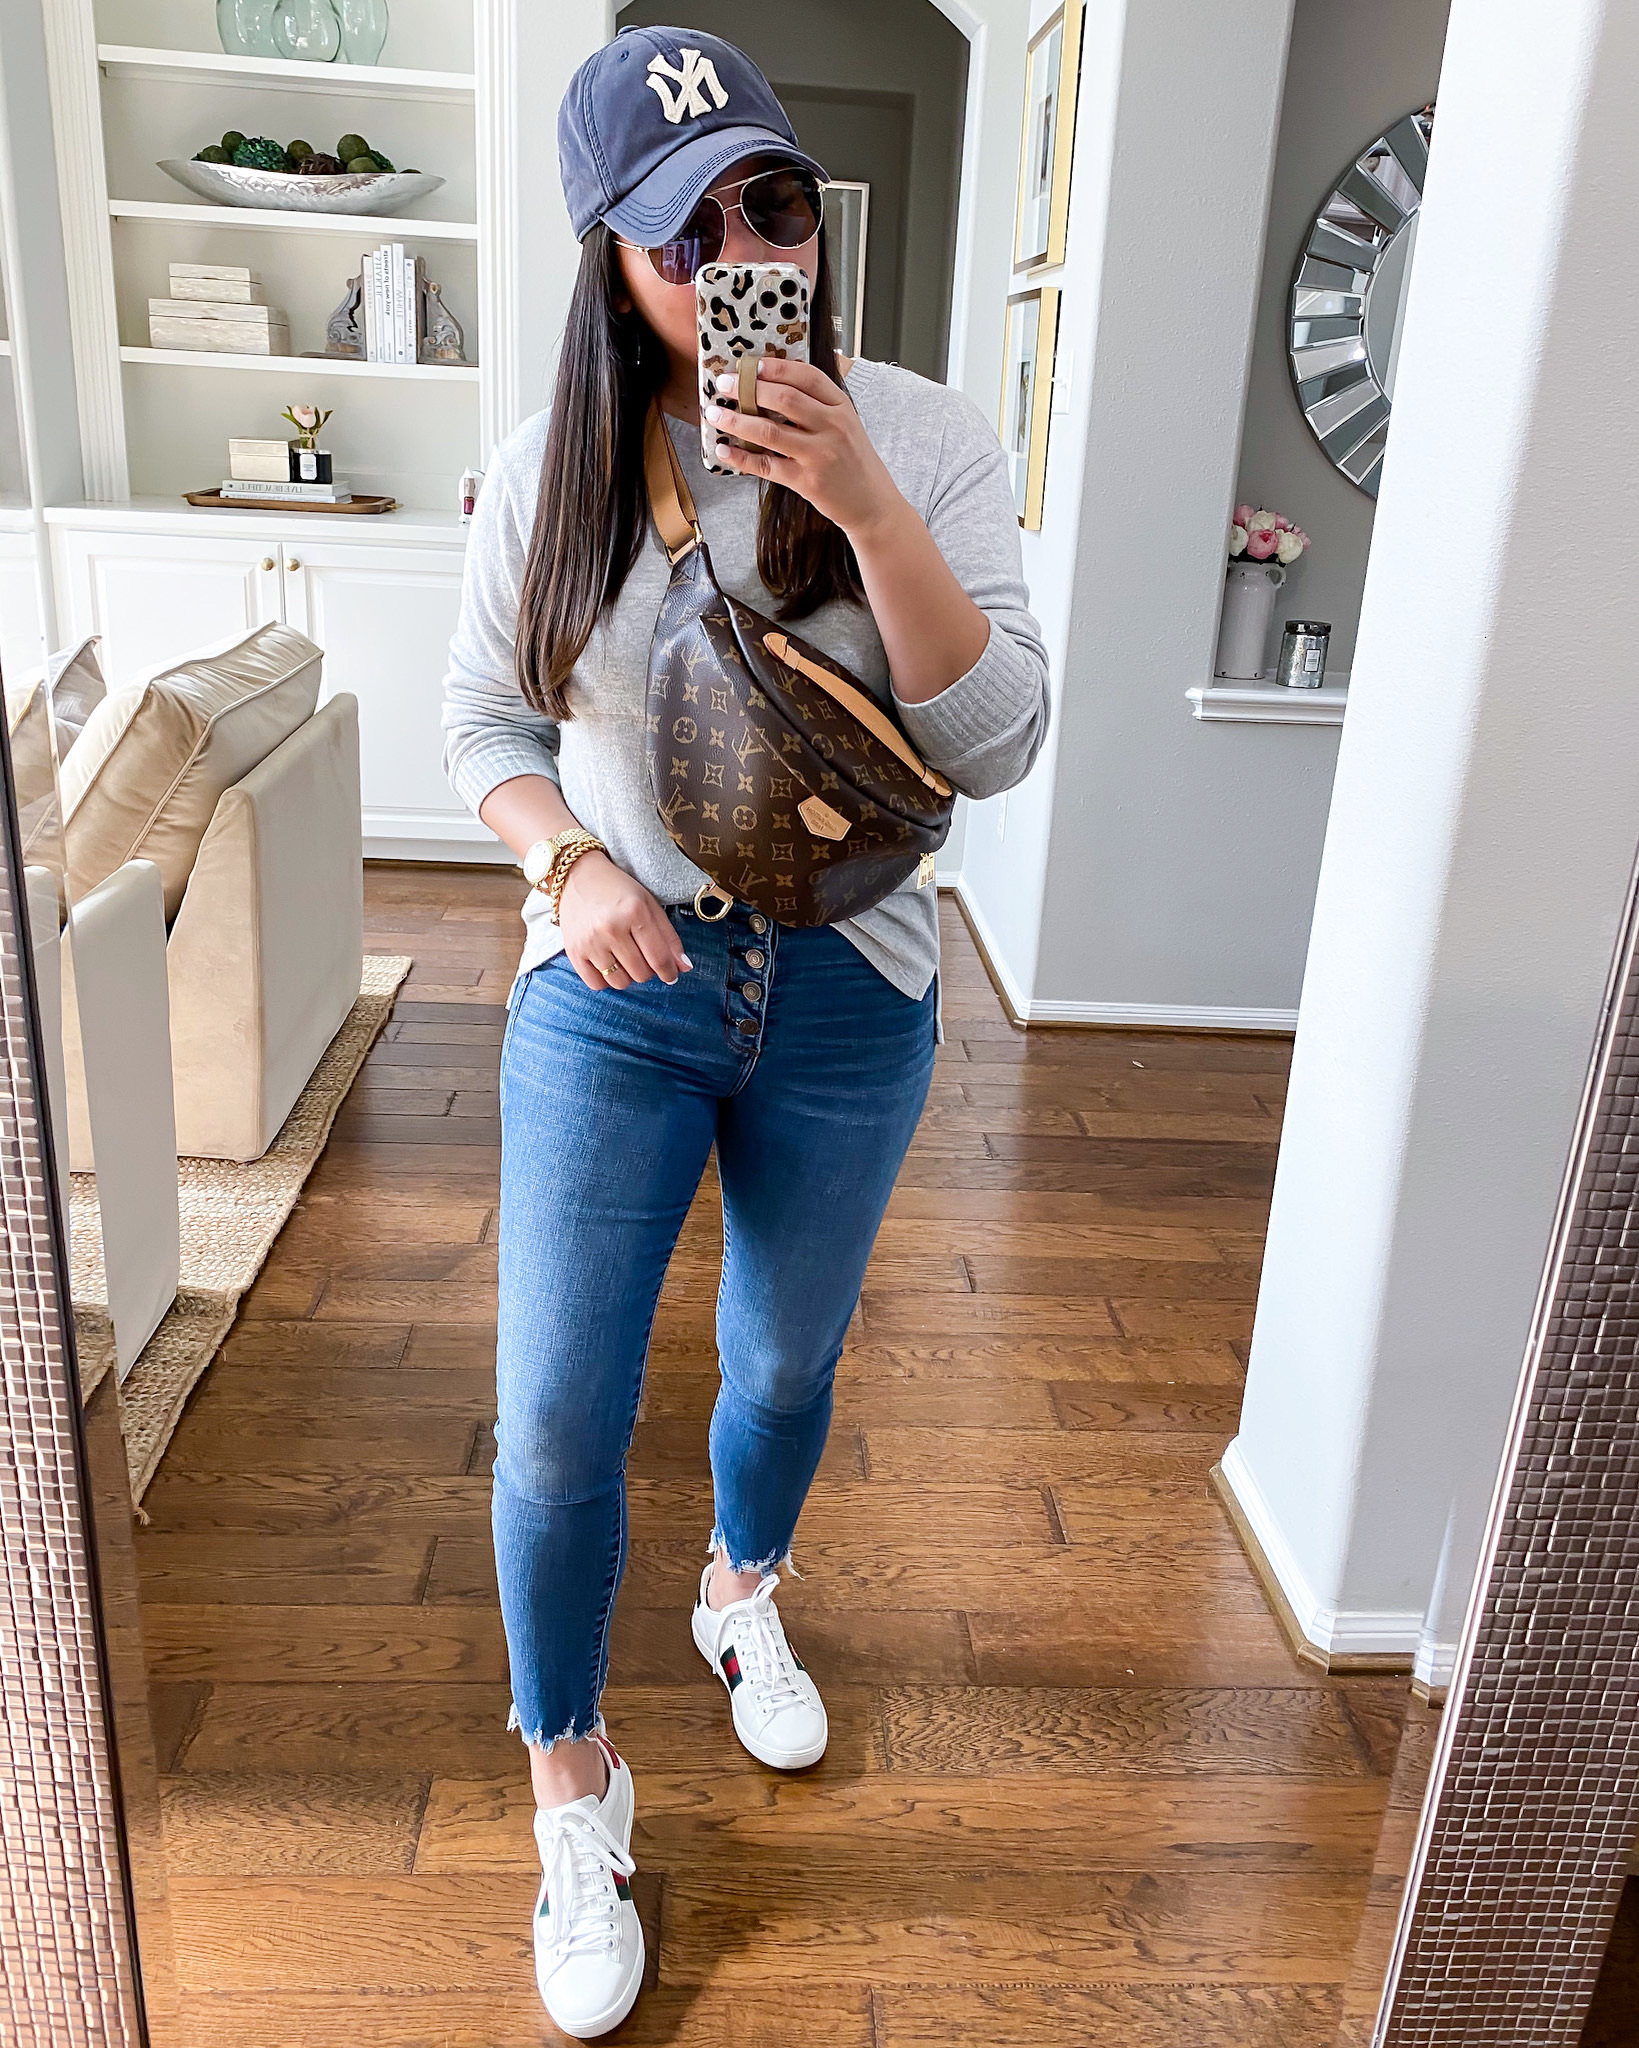 How to Style the Louis Vuitton Bumbag, LuxMommy